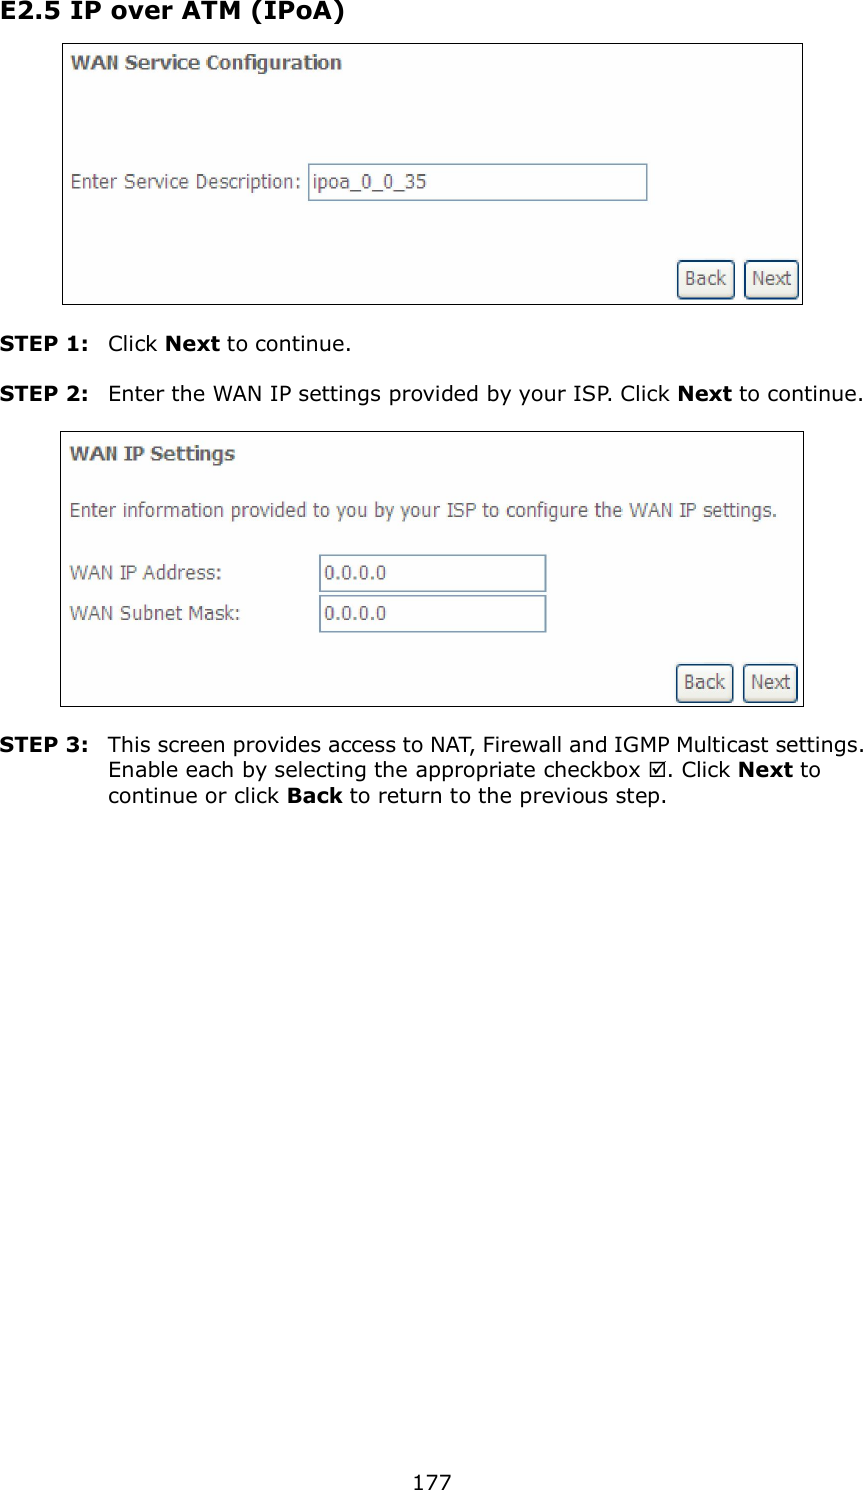  177 E2.5 IP over ATM (IPoA)   STEP 1:  Click Next to continue.  STEP 2:  Enter the WAN IP settings provided by your ISP. Click Next to continue.    STEP 3:  This screen provides access to NAT, Firewall and IGMP Multicast settings. Enable each by selecting the appropriate checkbox . Click Next to continue or click Back to return to the previous step.  